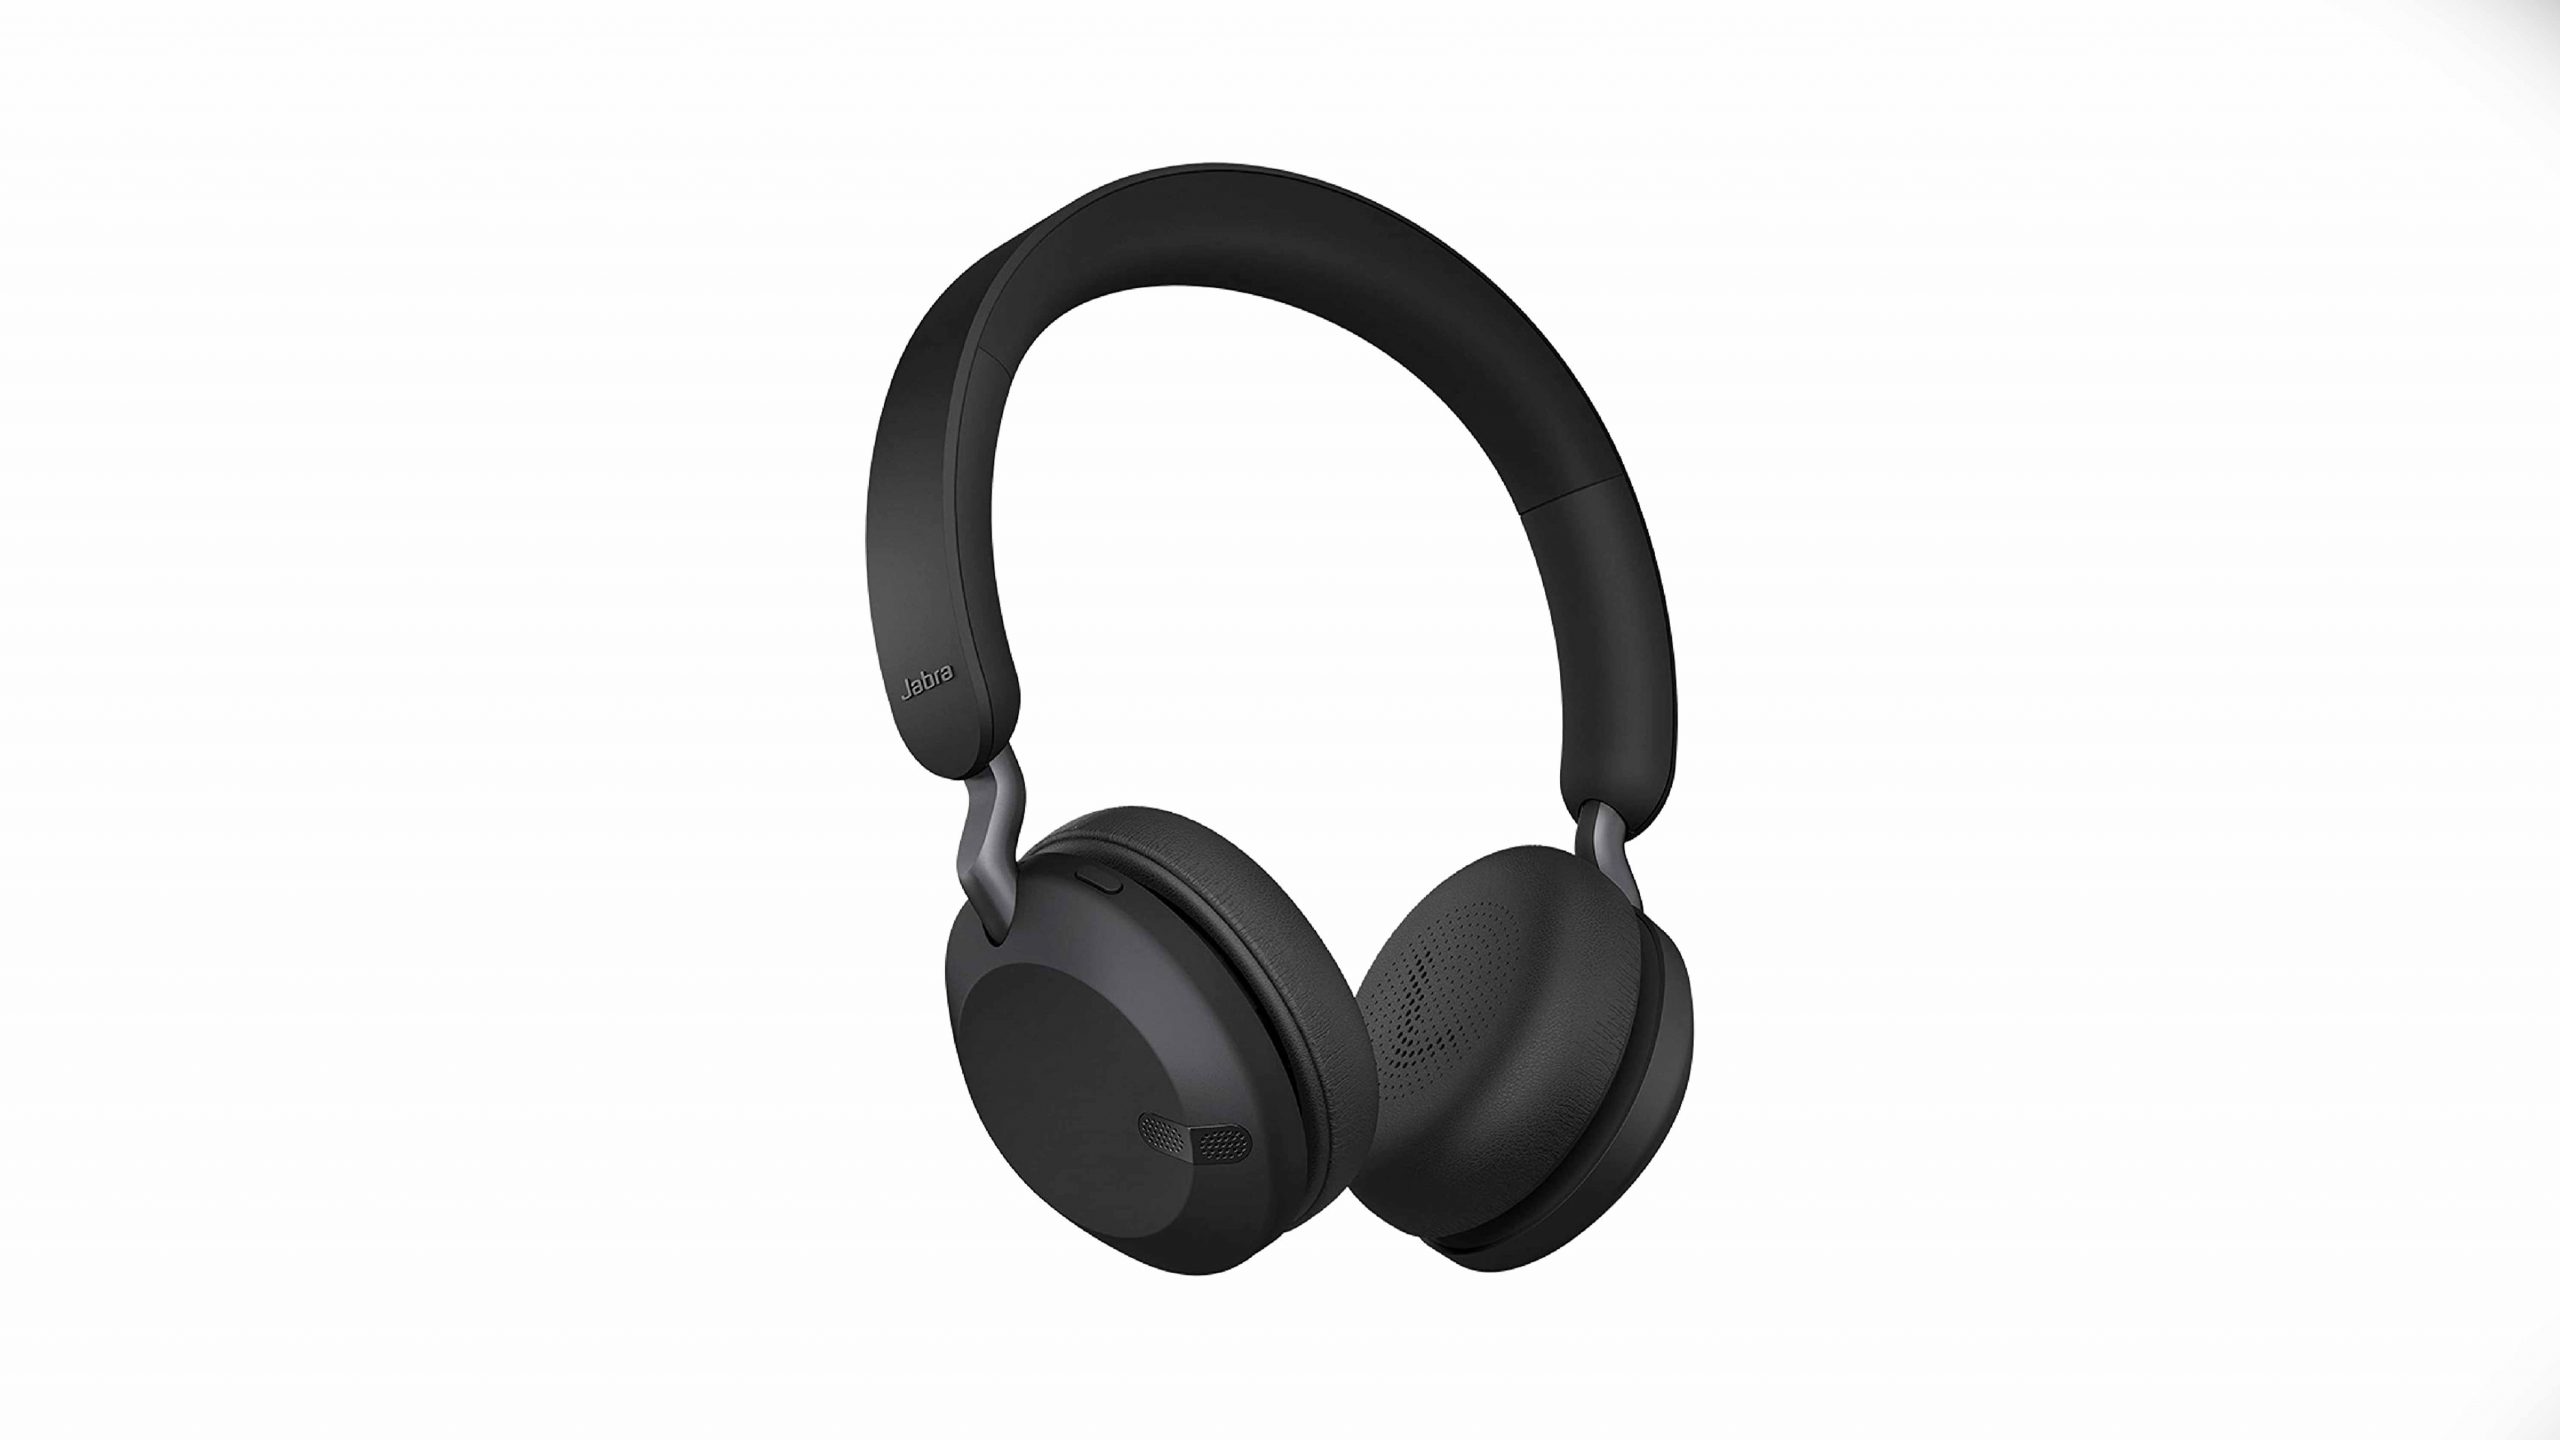 Best Android Headphones With Mic - Enjoy High Quality Audio And Clear Communication